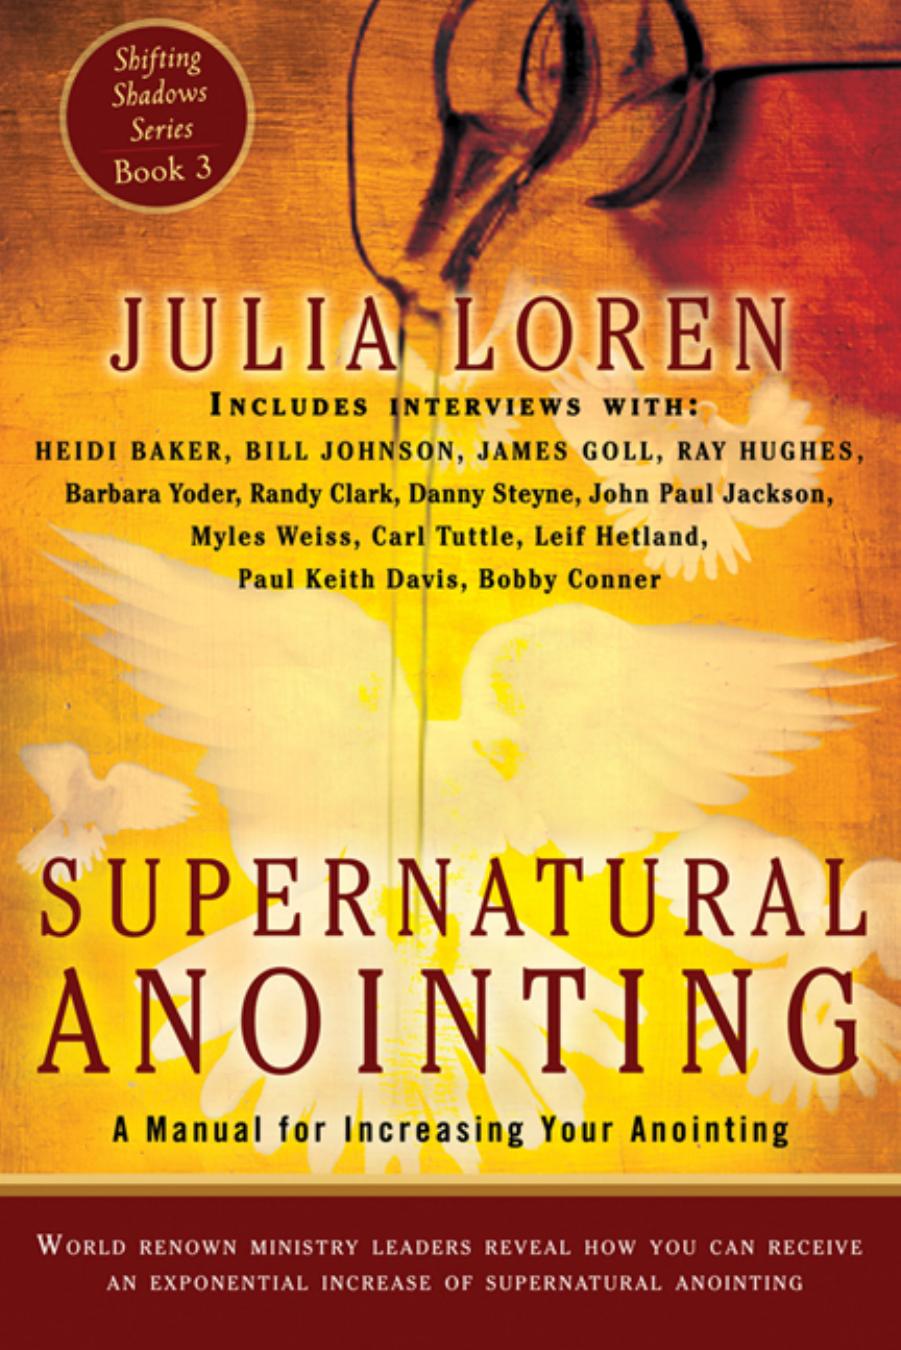 Supernatural Anointing: A Manual for Increasing Your Anointing by Julia Loren